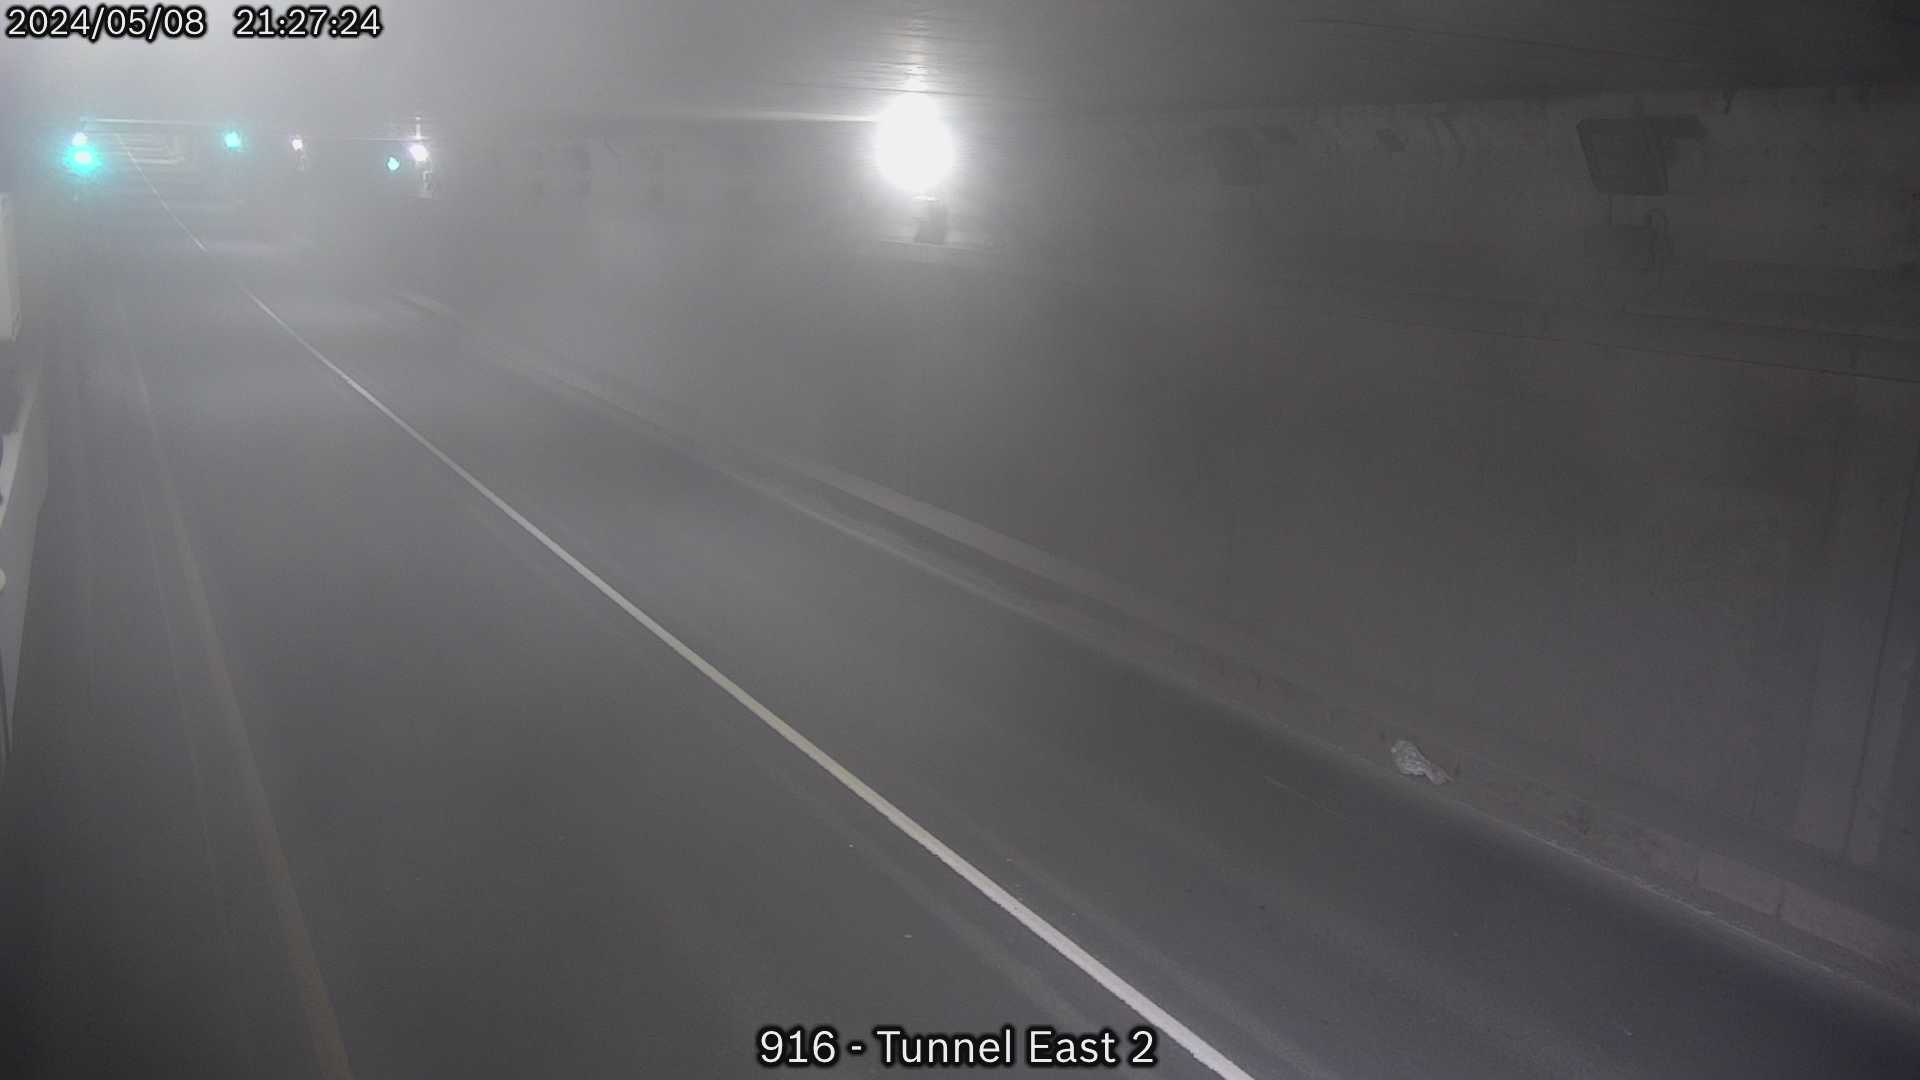 Traffic Camera EastBound Thorold Tunnel near West of Welland Canal